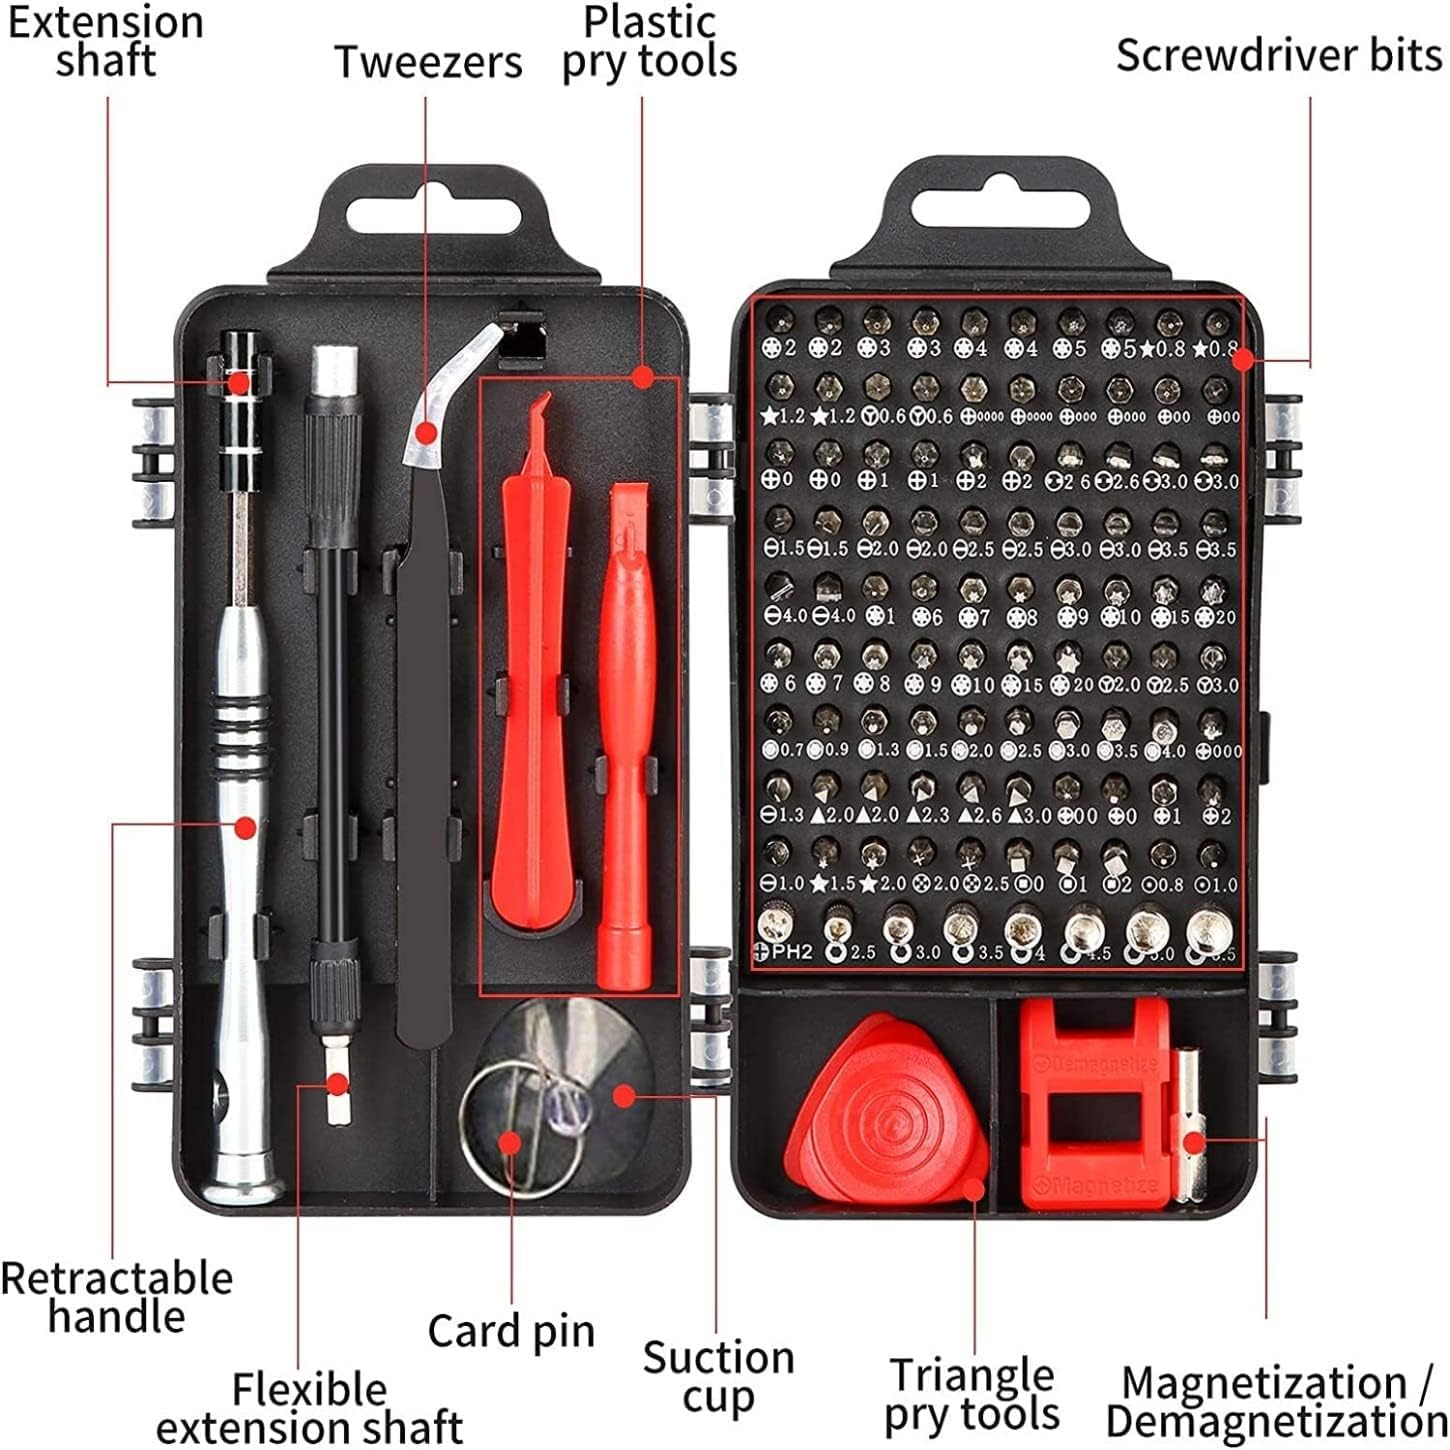 SKY-TOUCH Precision Screwdriver Set, 110 in 1 Magnetic Driver Repair Tool Kits